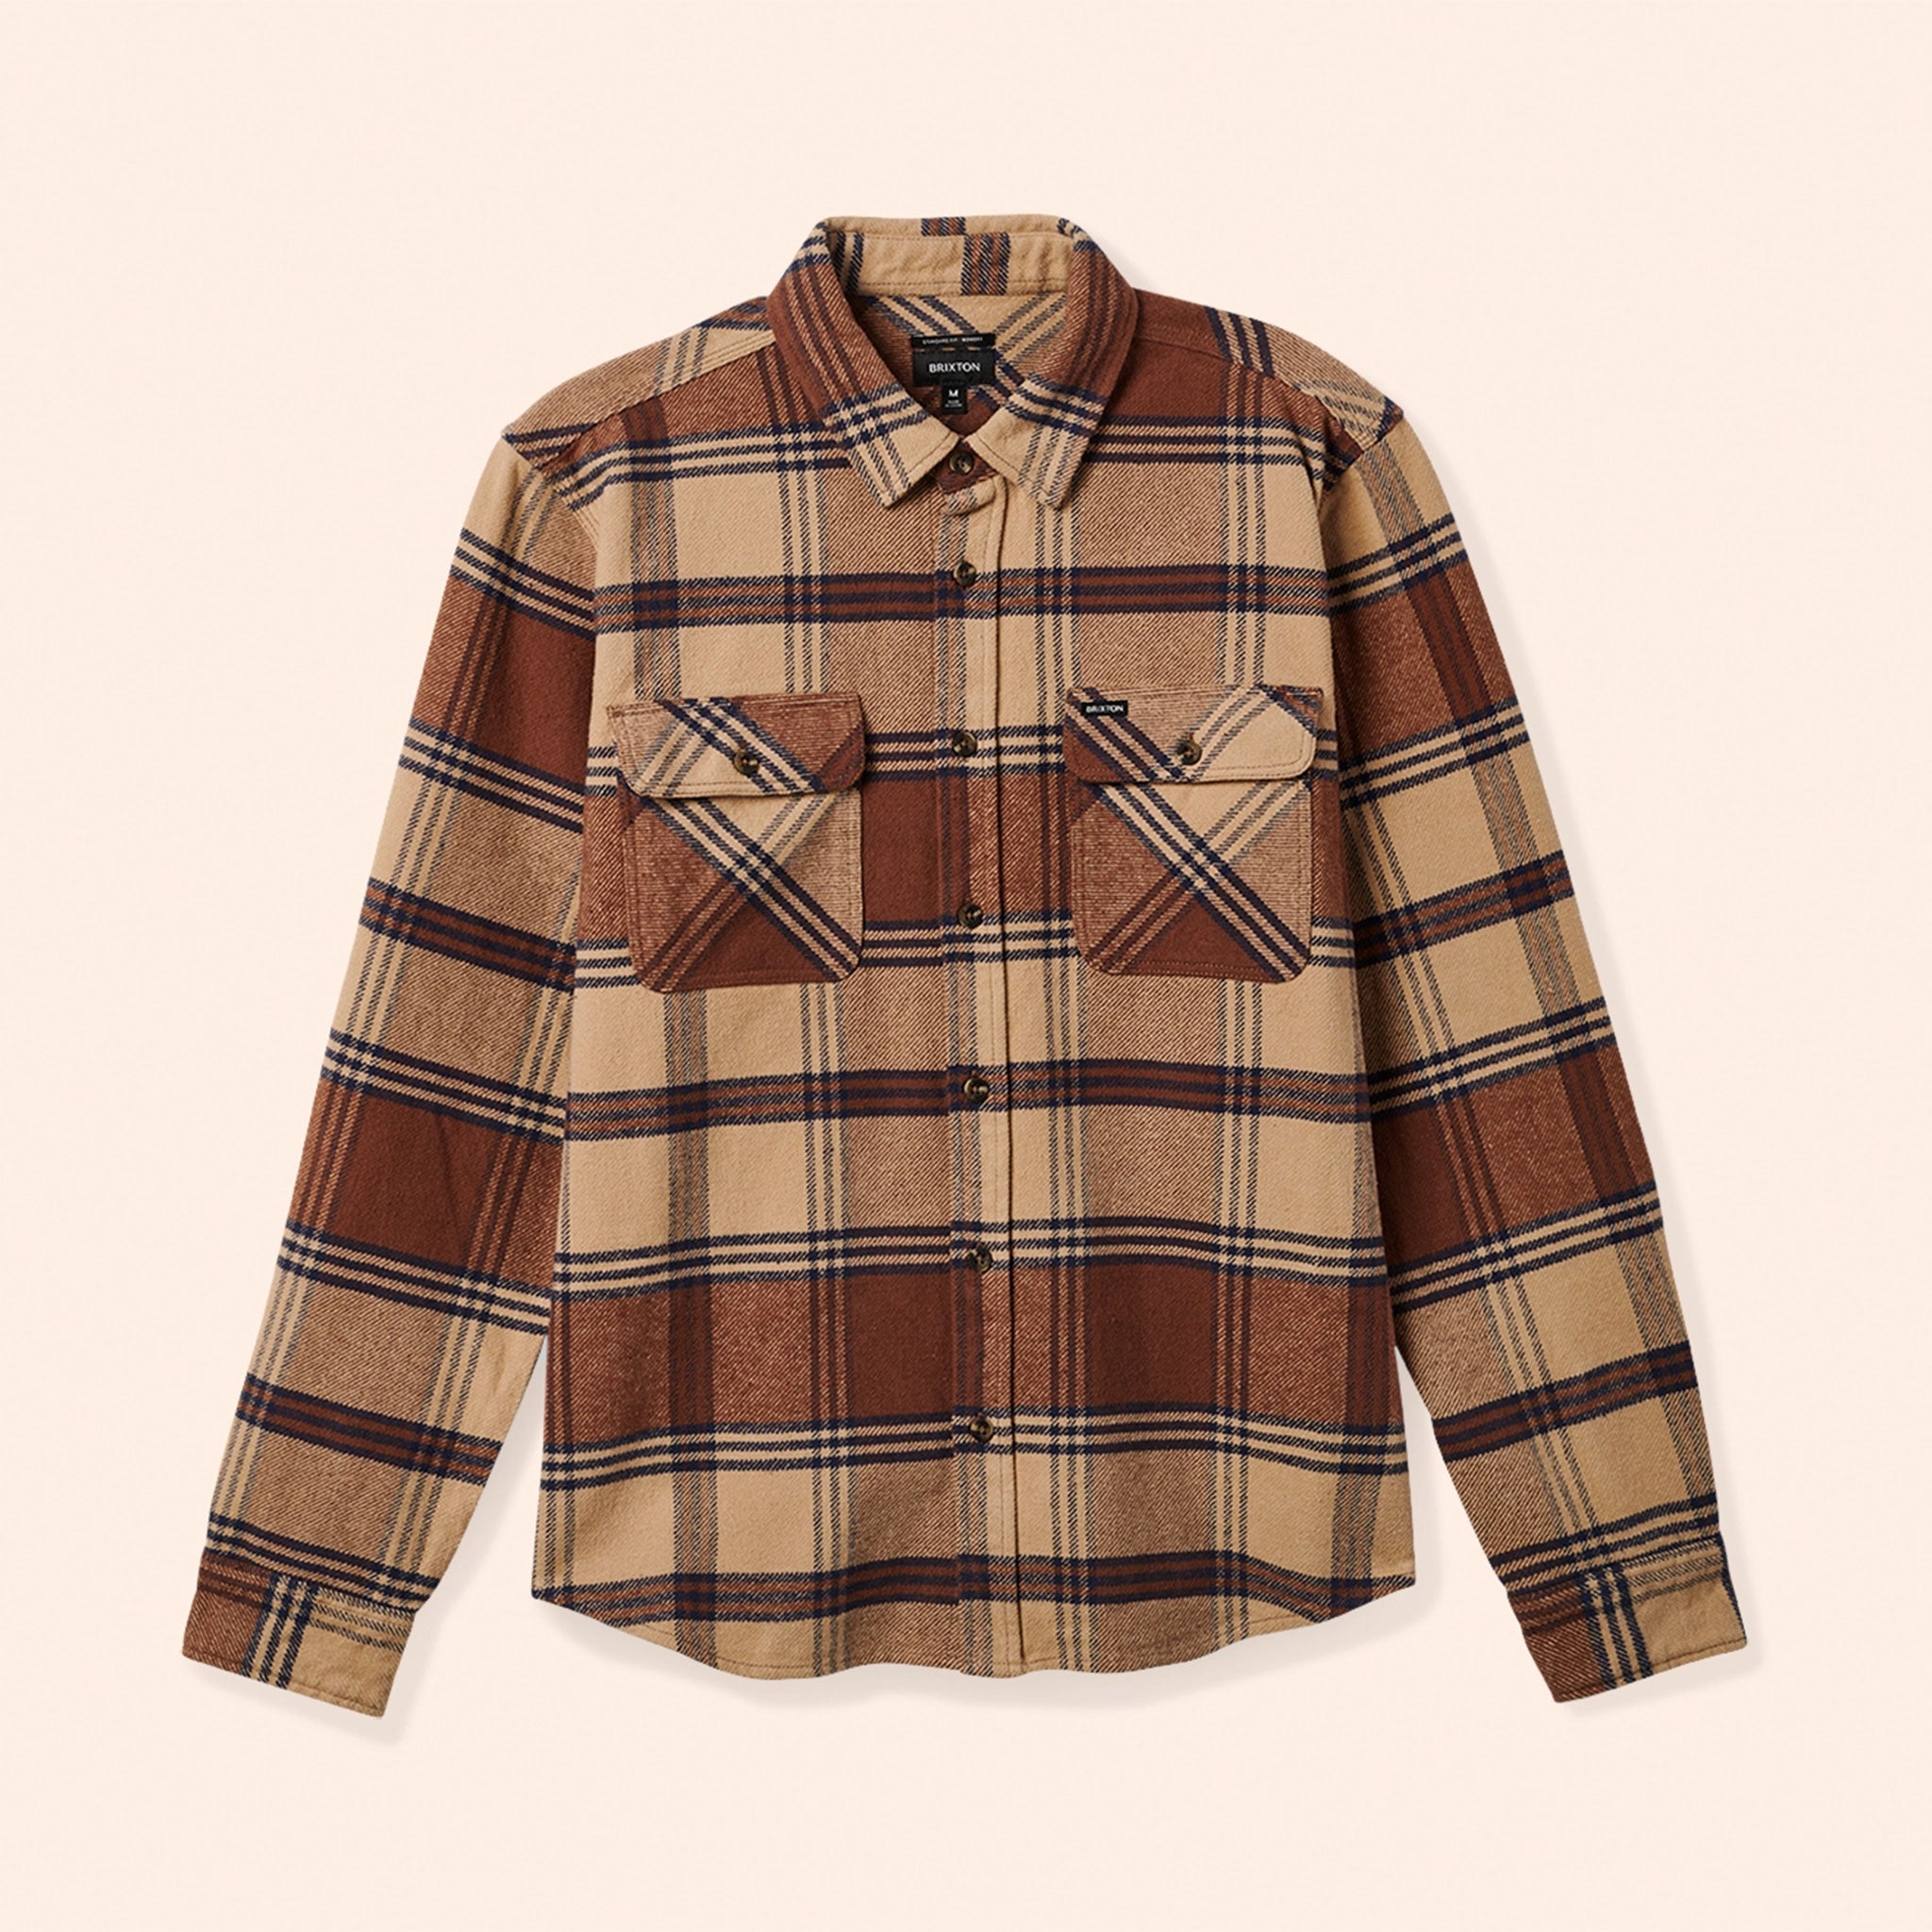 A brown and tan mens flannel button up shirt.